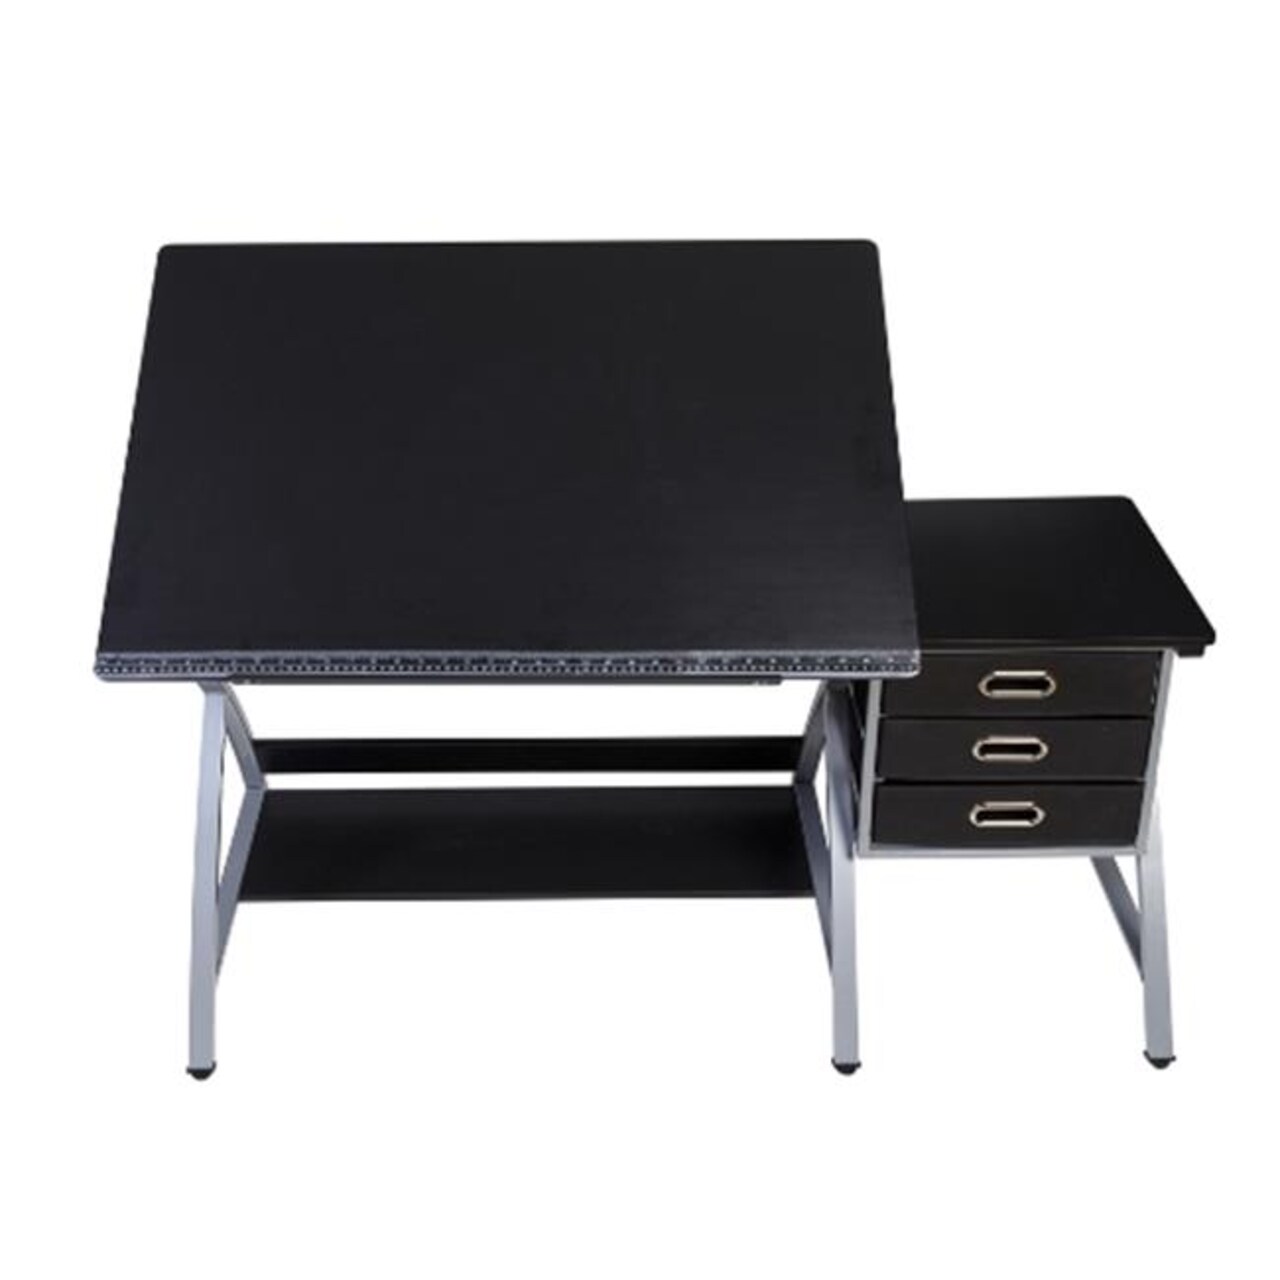 Comfort Products 50-CS03 Craft Station with Stool - Black &#x26; Silver - 30.25 x 24 x 50.25 in.